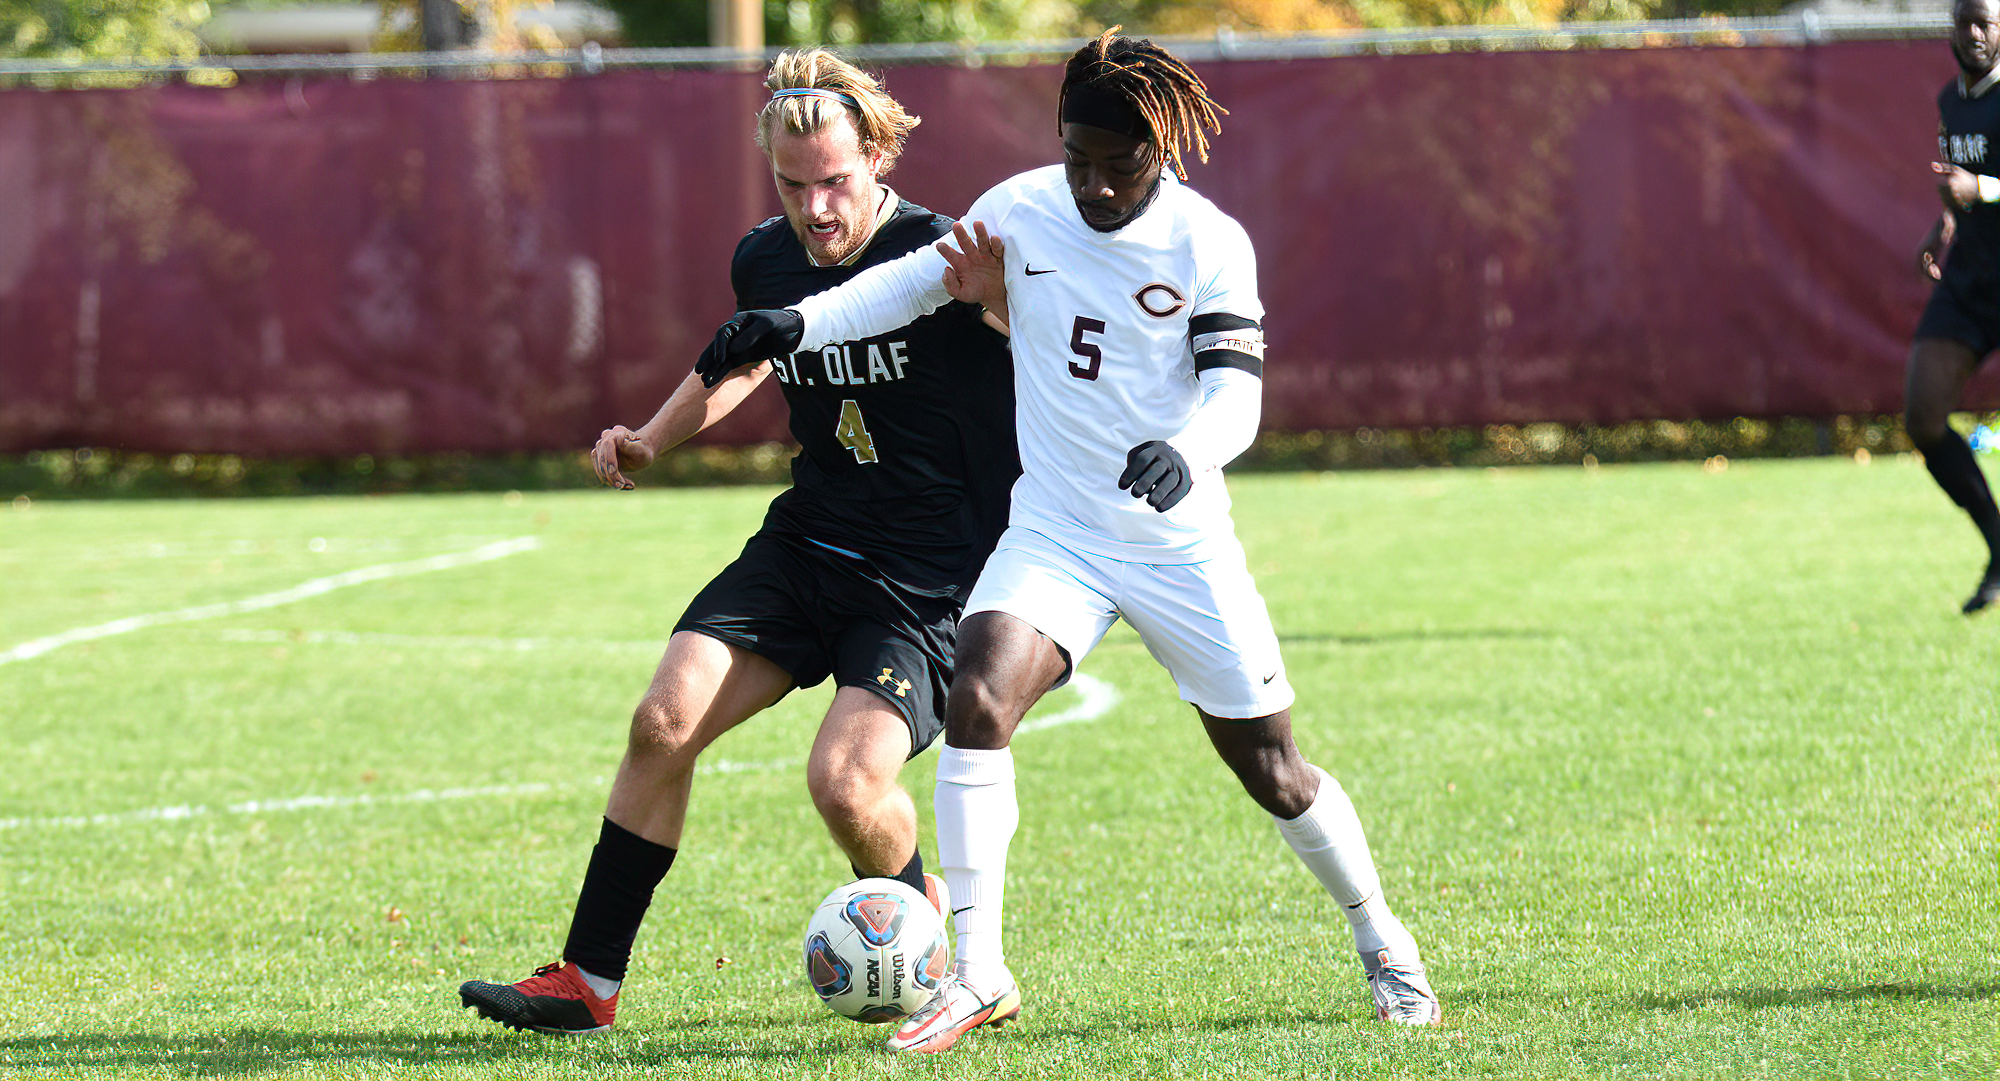 Senior Telvin Vah led the Cobbers with two shots on goal in the team's game at regionally-ranked St. Olaf.